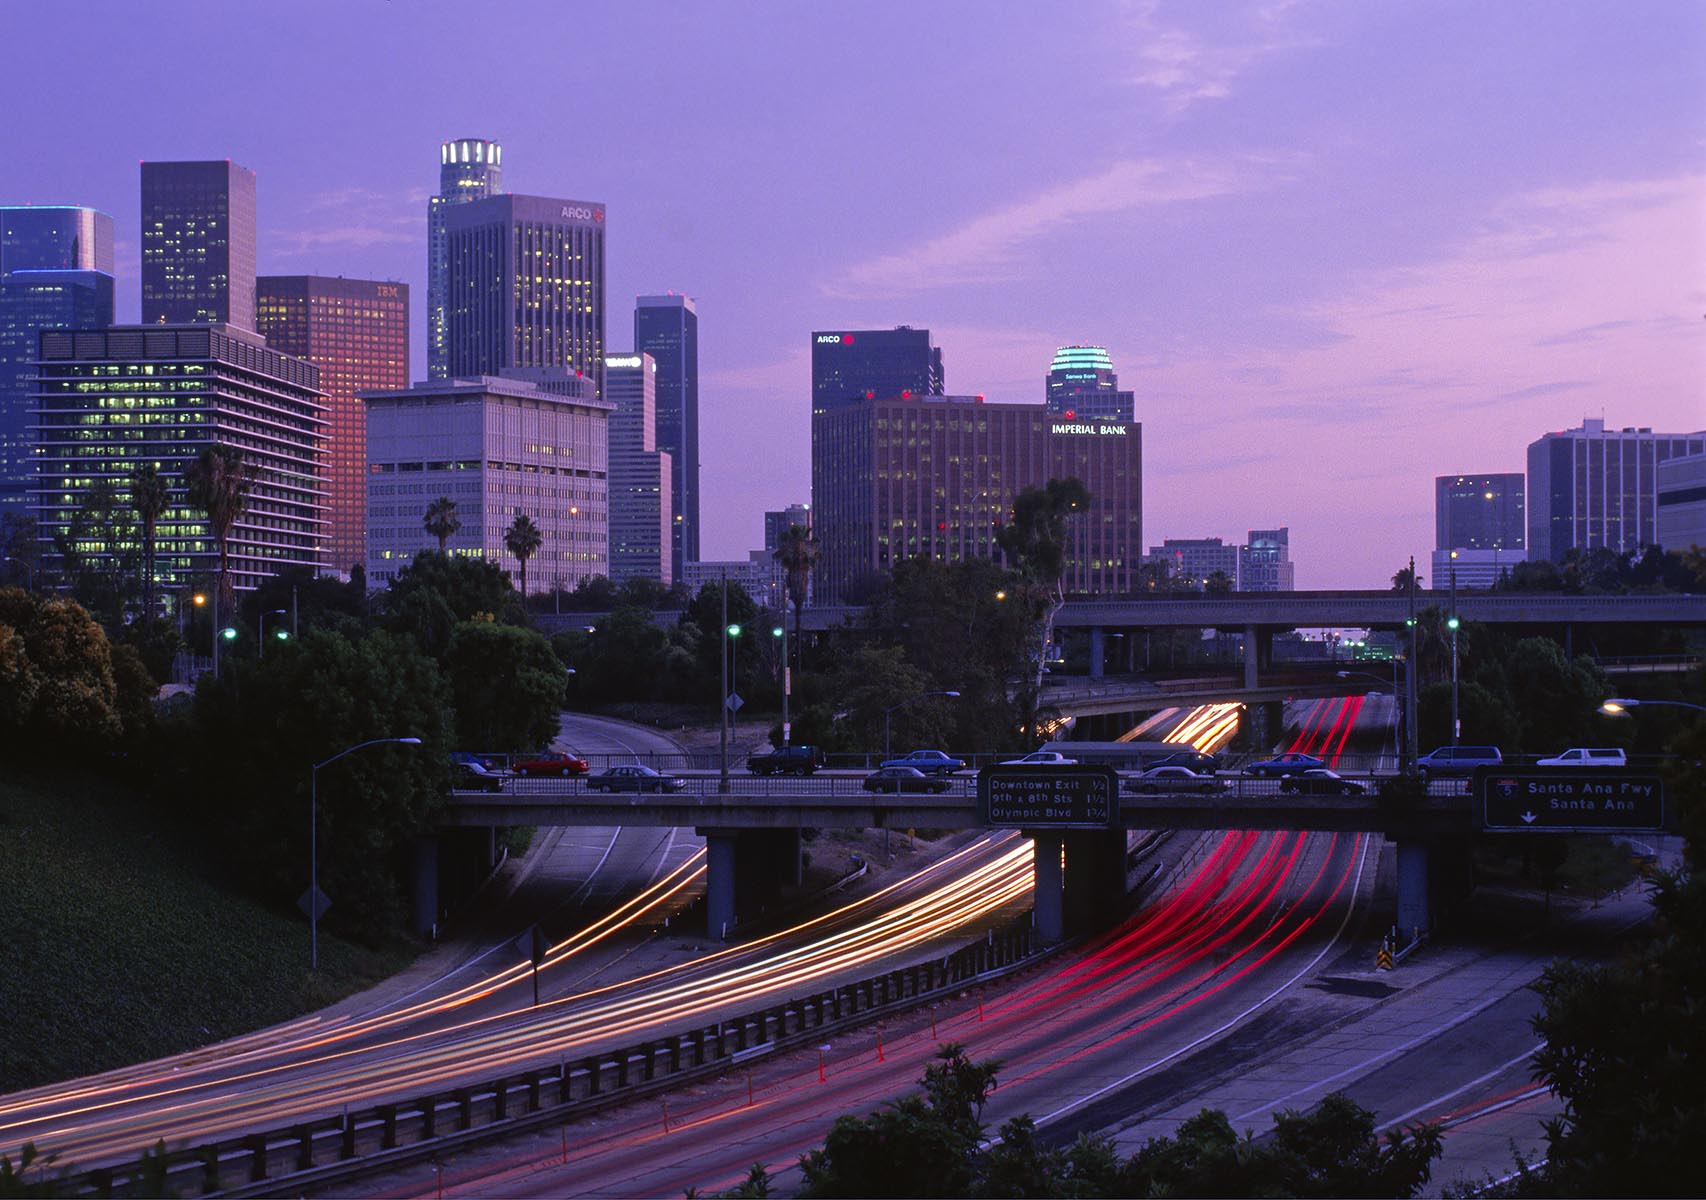 The downtown LOS ANGELES SKYLINE & FREEWAY at sunset - CALIFORNIA